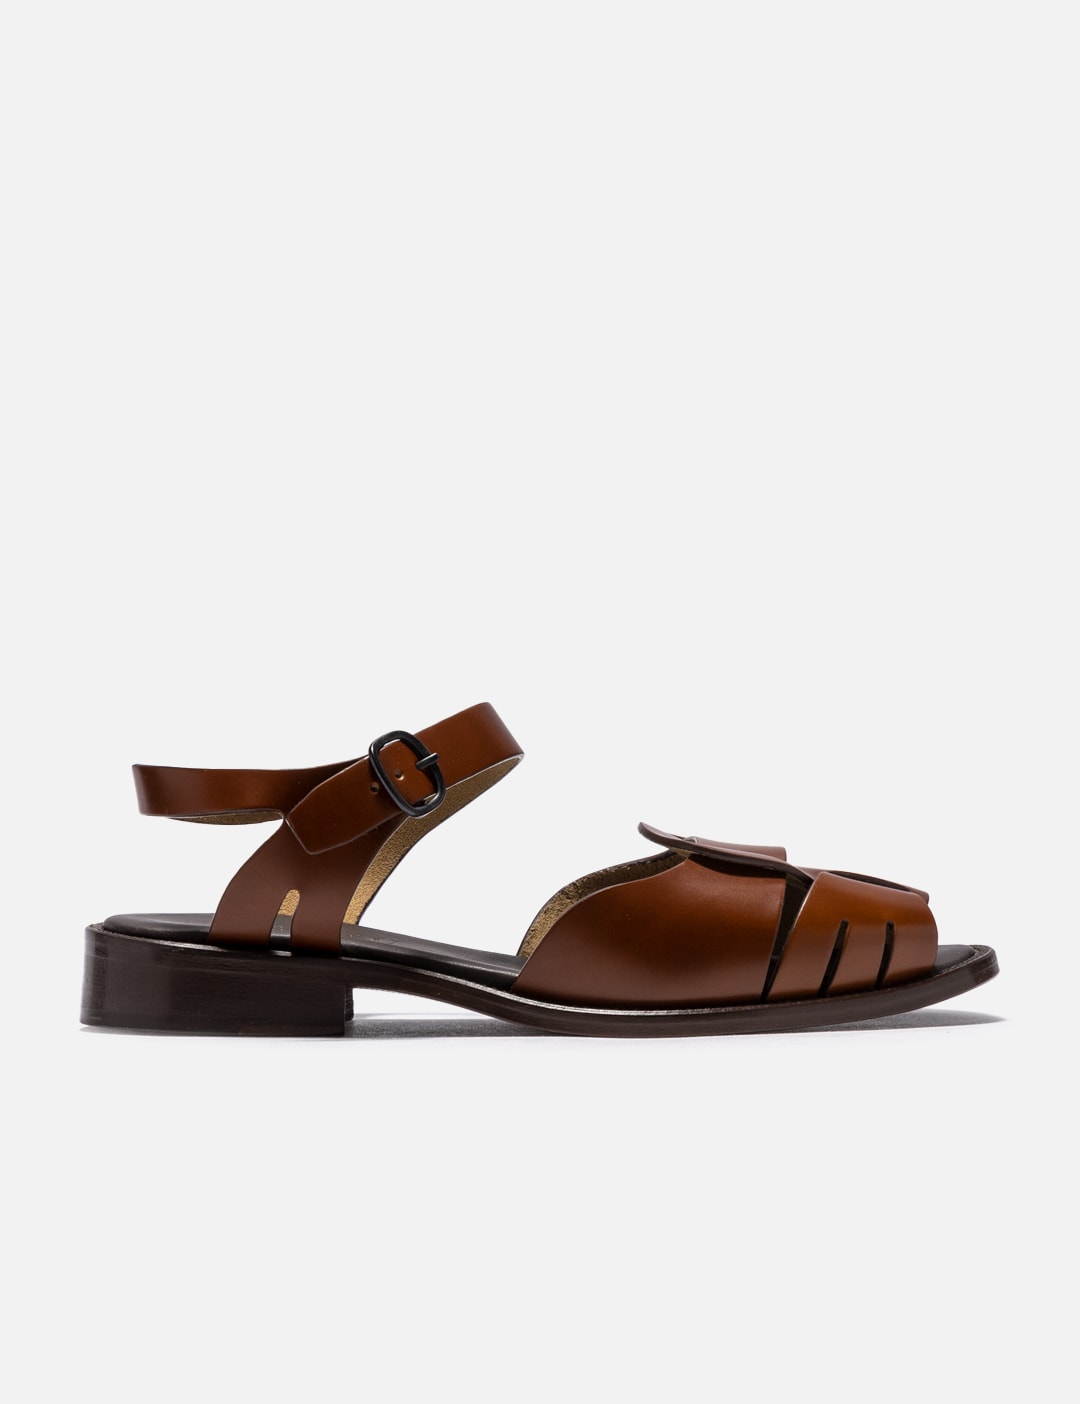 Hereu - ANCORA SANDAL | HBX - Globally Curated Fashion and Lifestyle by ...